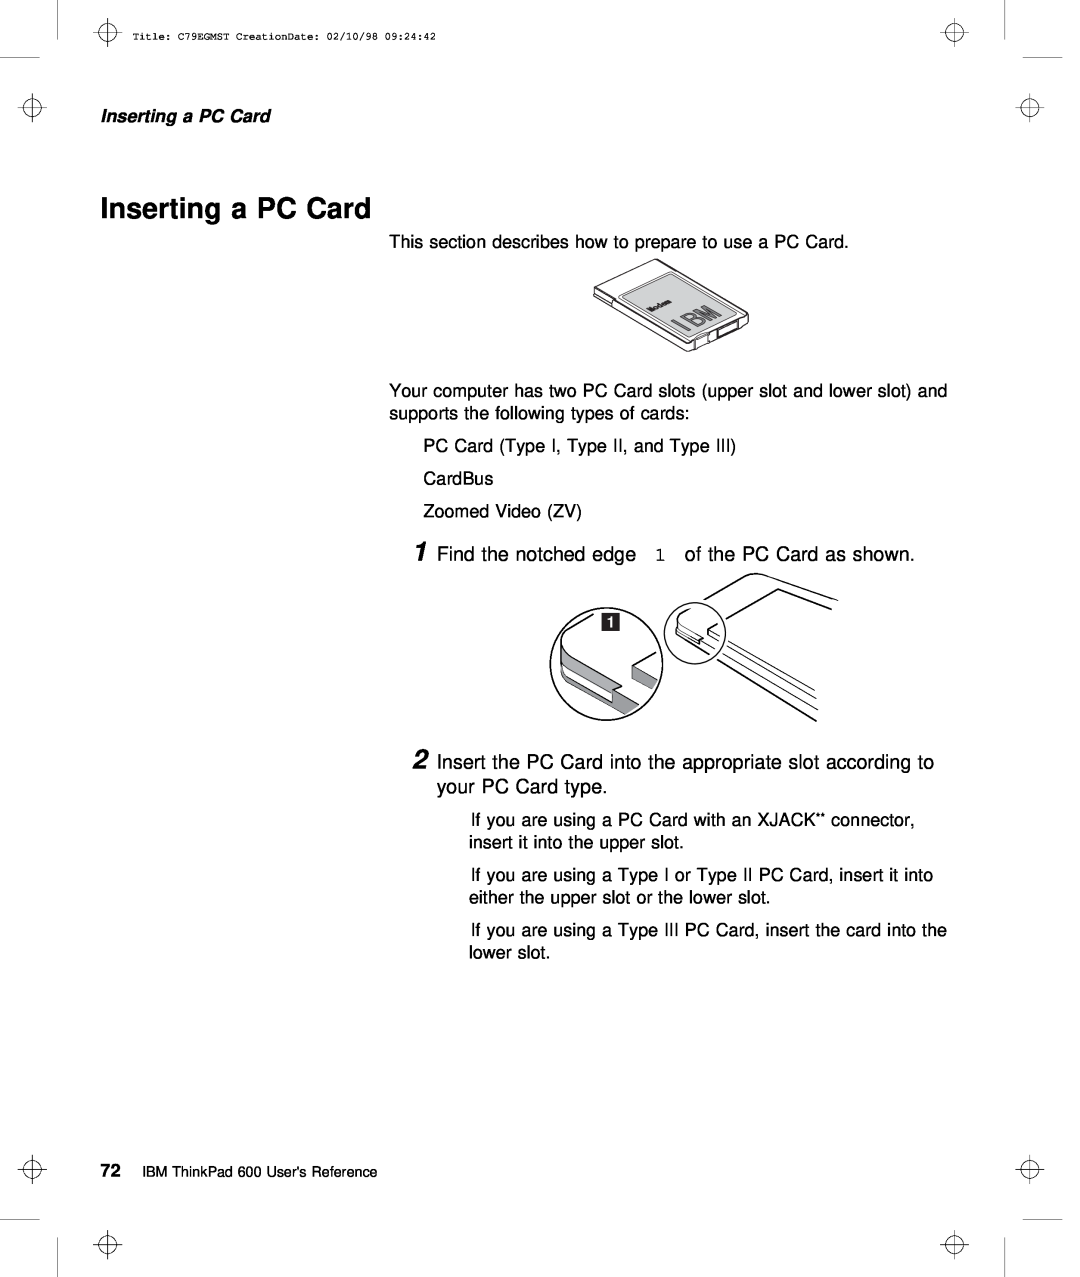 IBM C79EGMST manual Inserting a PC Card, 1Find the notched edge1 of the PC Card as shown 